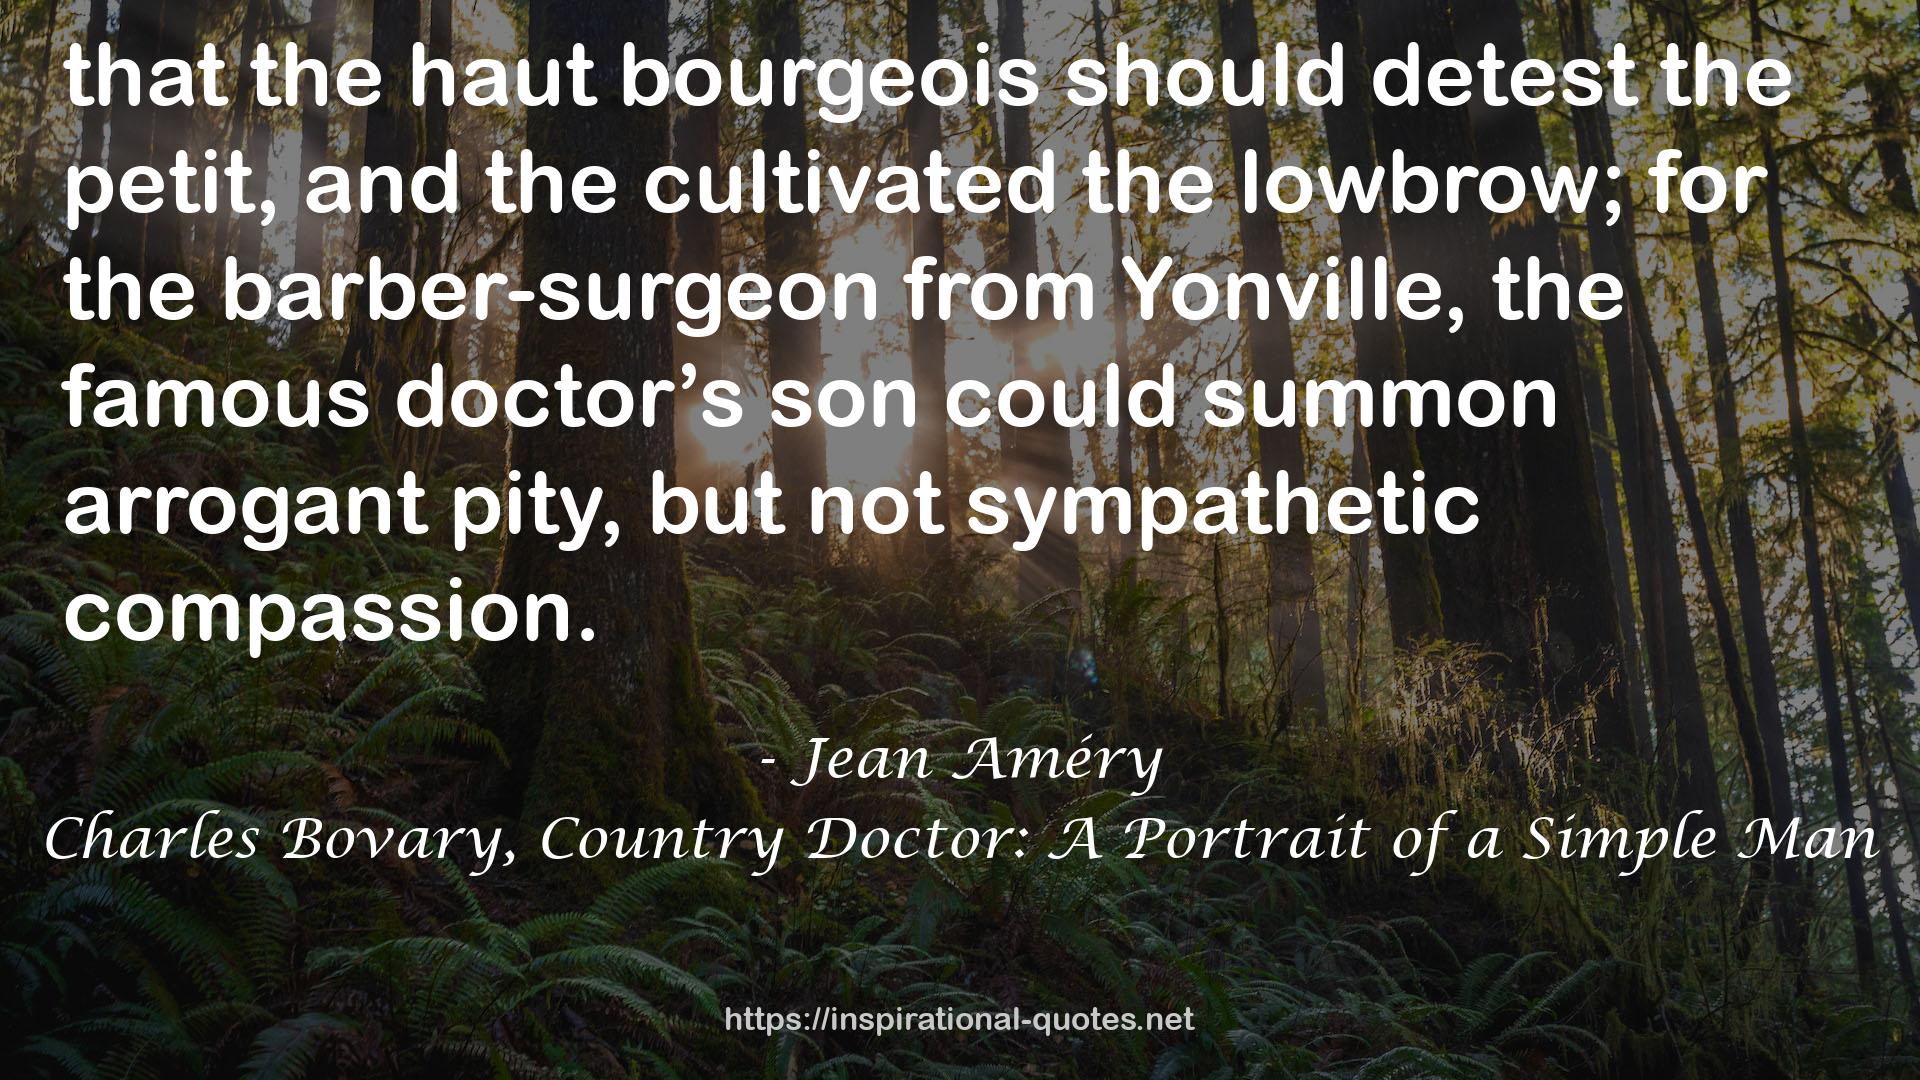 Charles Bovary, Country Doctor: A Portrait of a Simple Man QUOTES